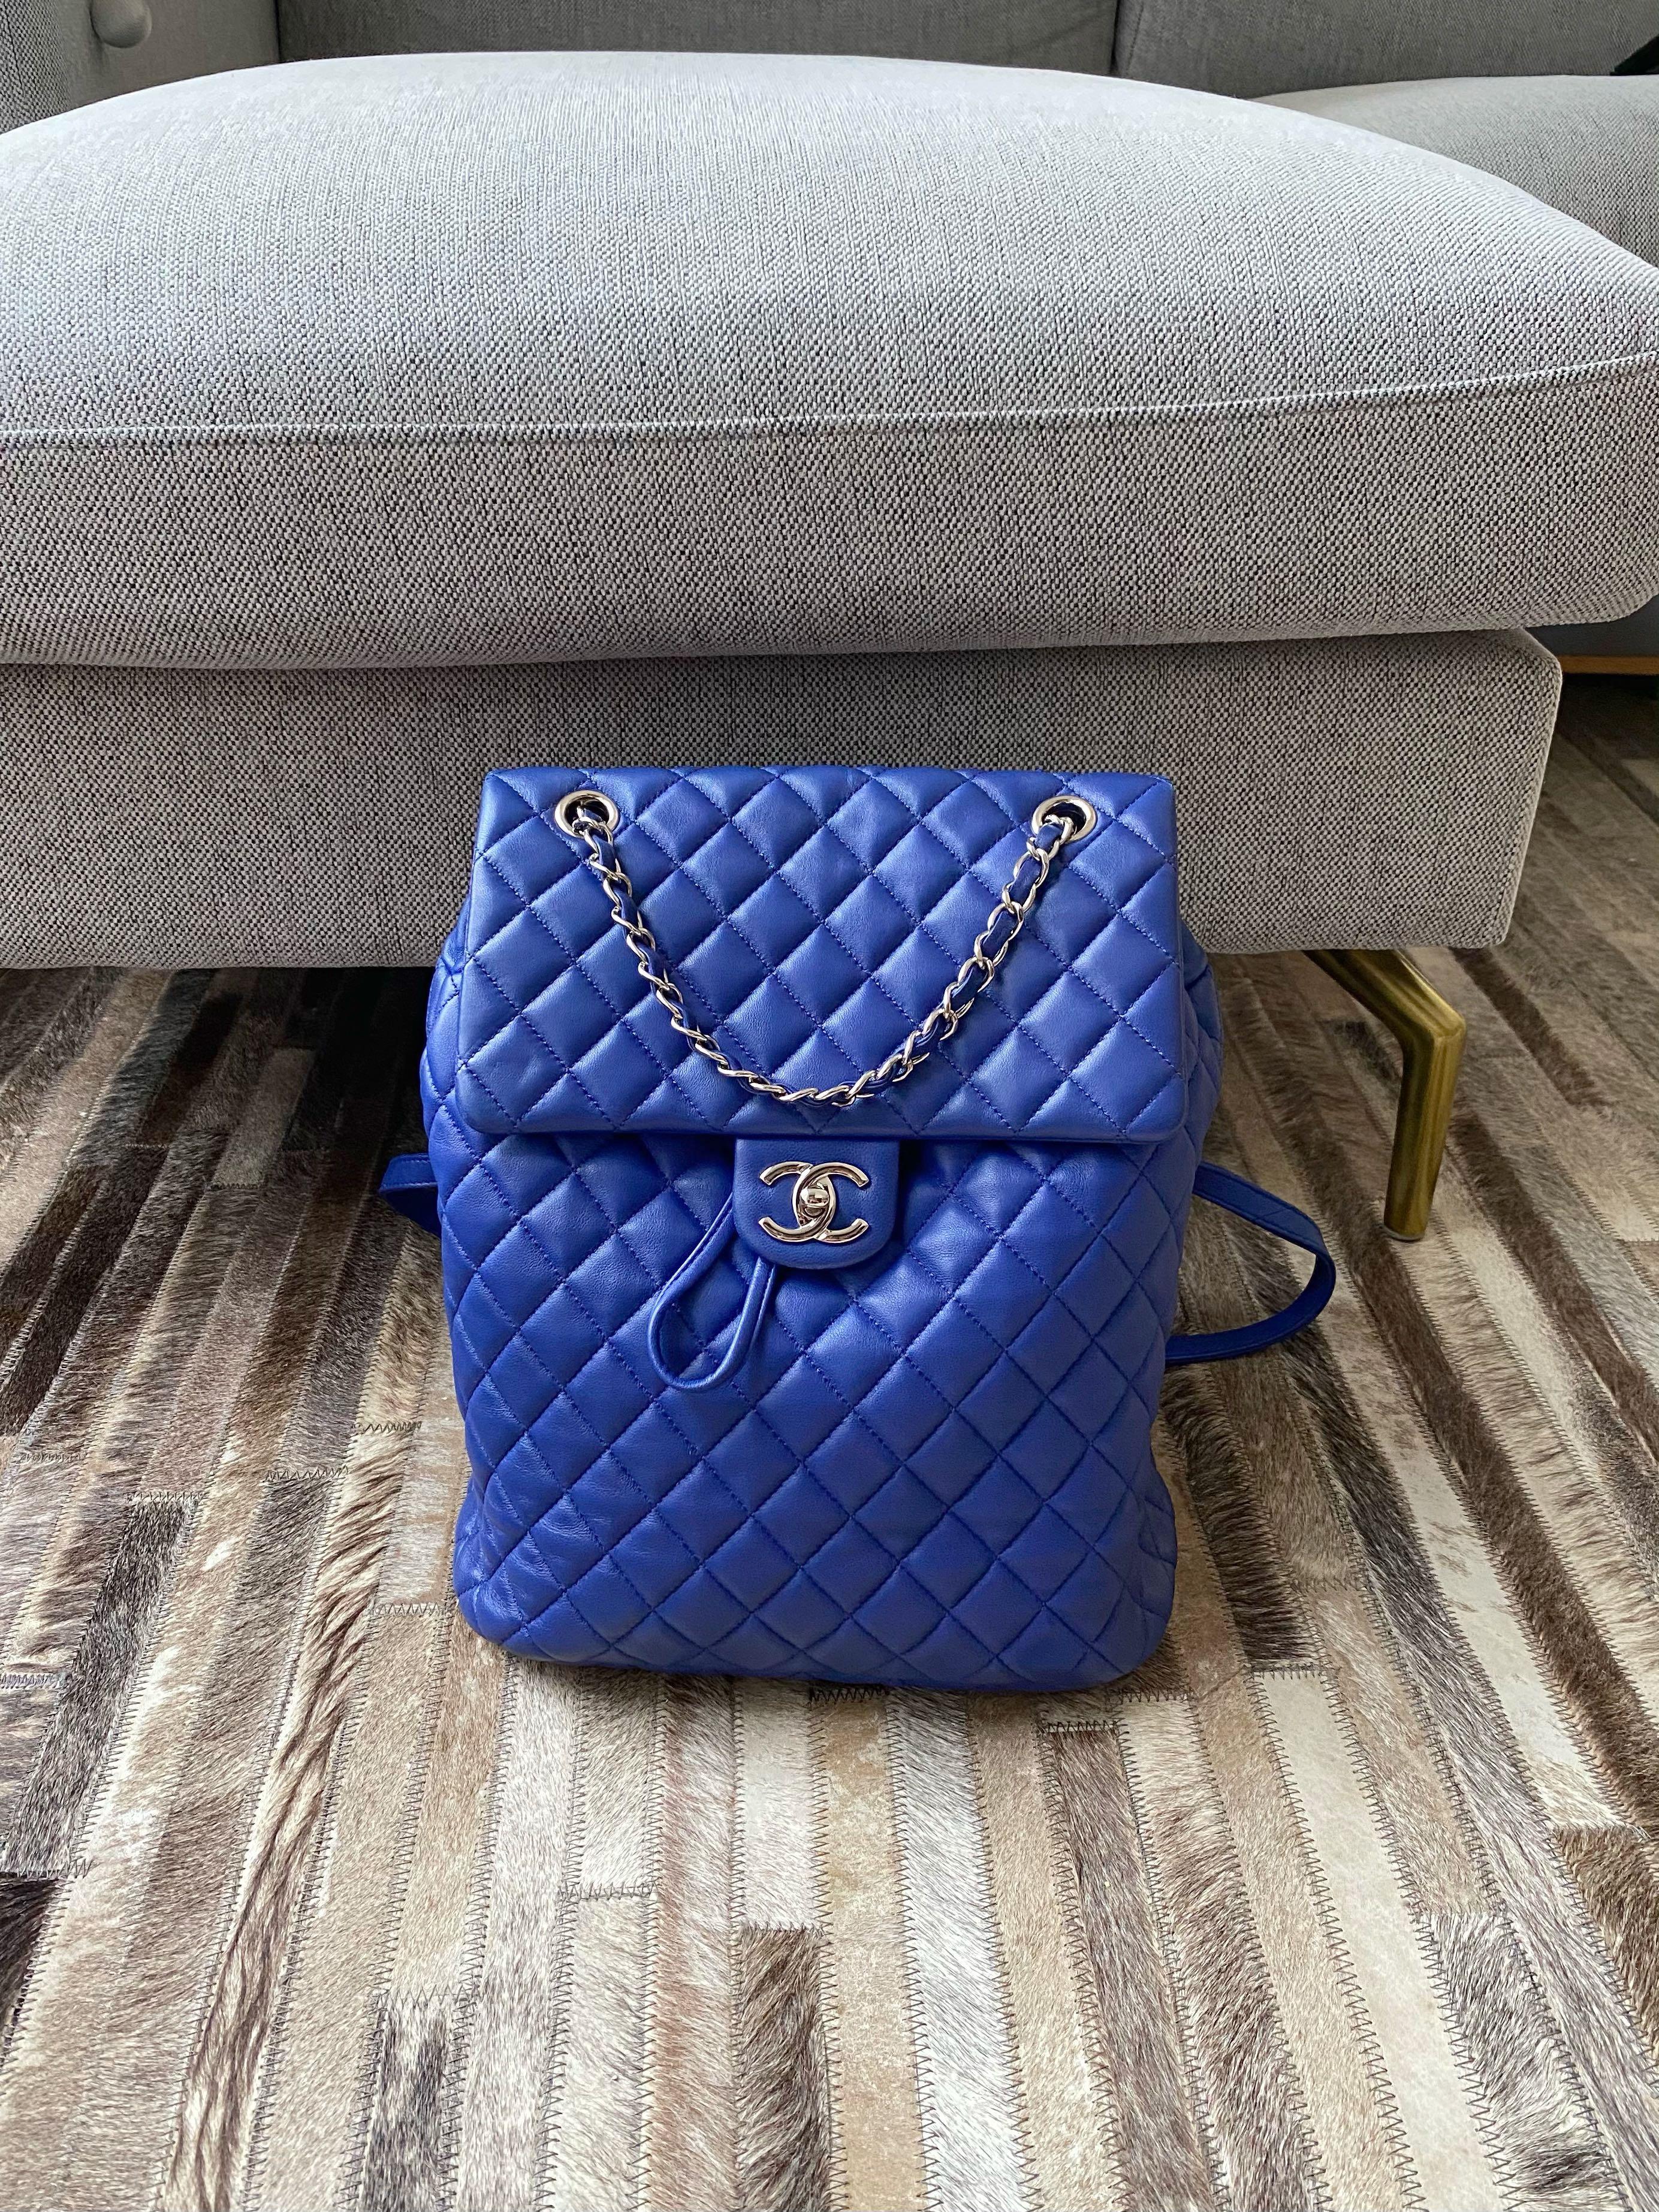 SOLD Brand New Chanel 18C Classic Quilted Cobalt Blue Caviar Rectangular  Mini SHW Luxury Bags  Wallets on Carousell